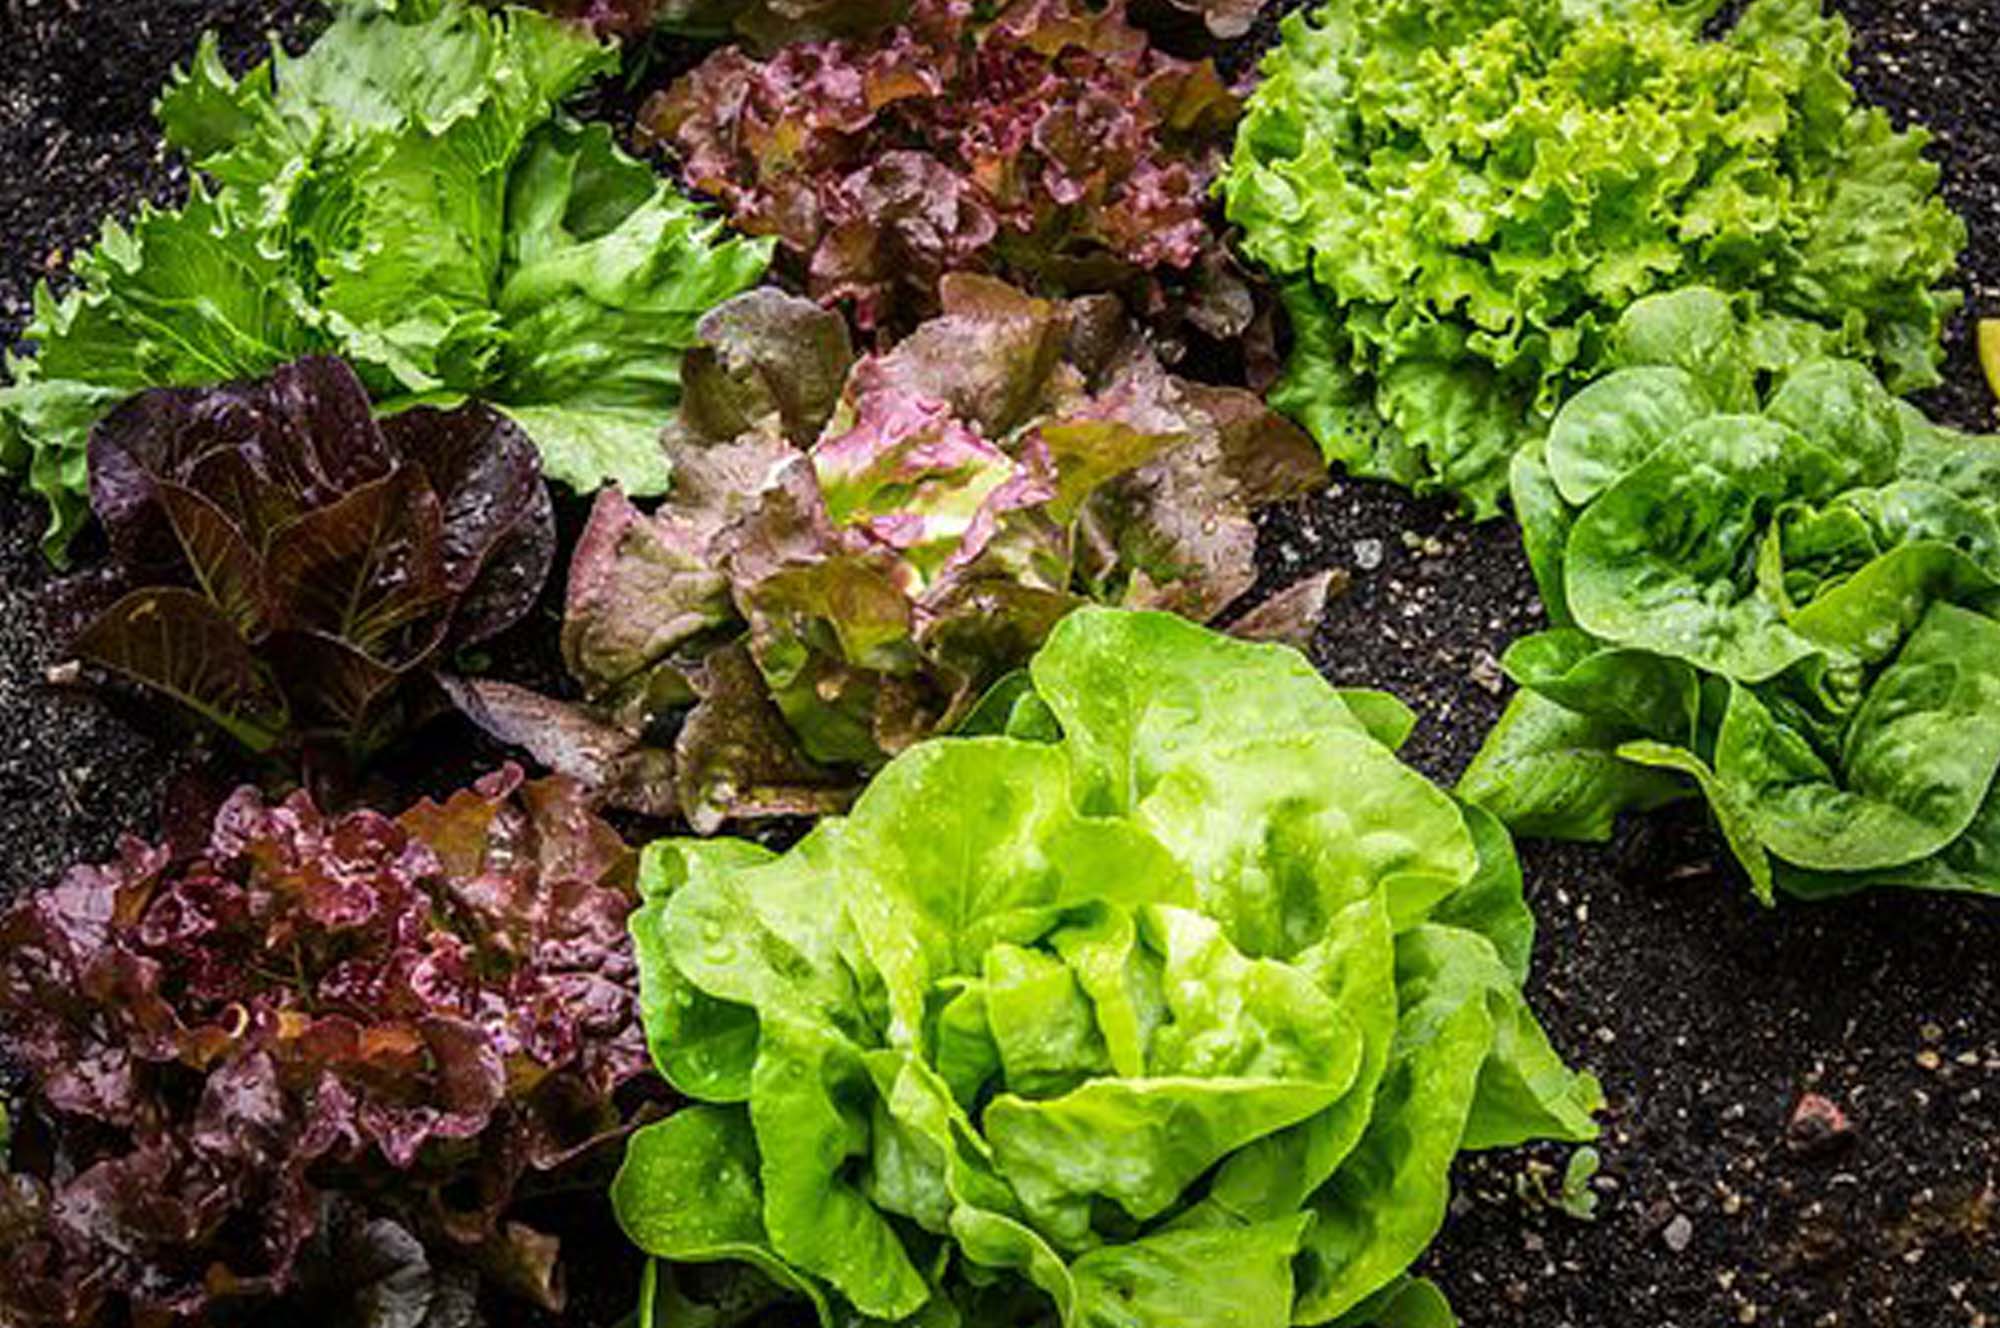 How To Grow Lettuce In Grow Bags 